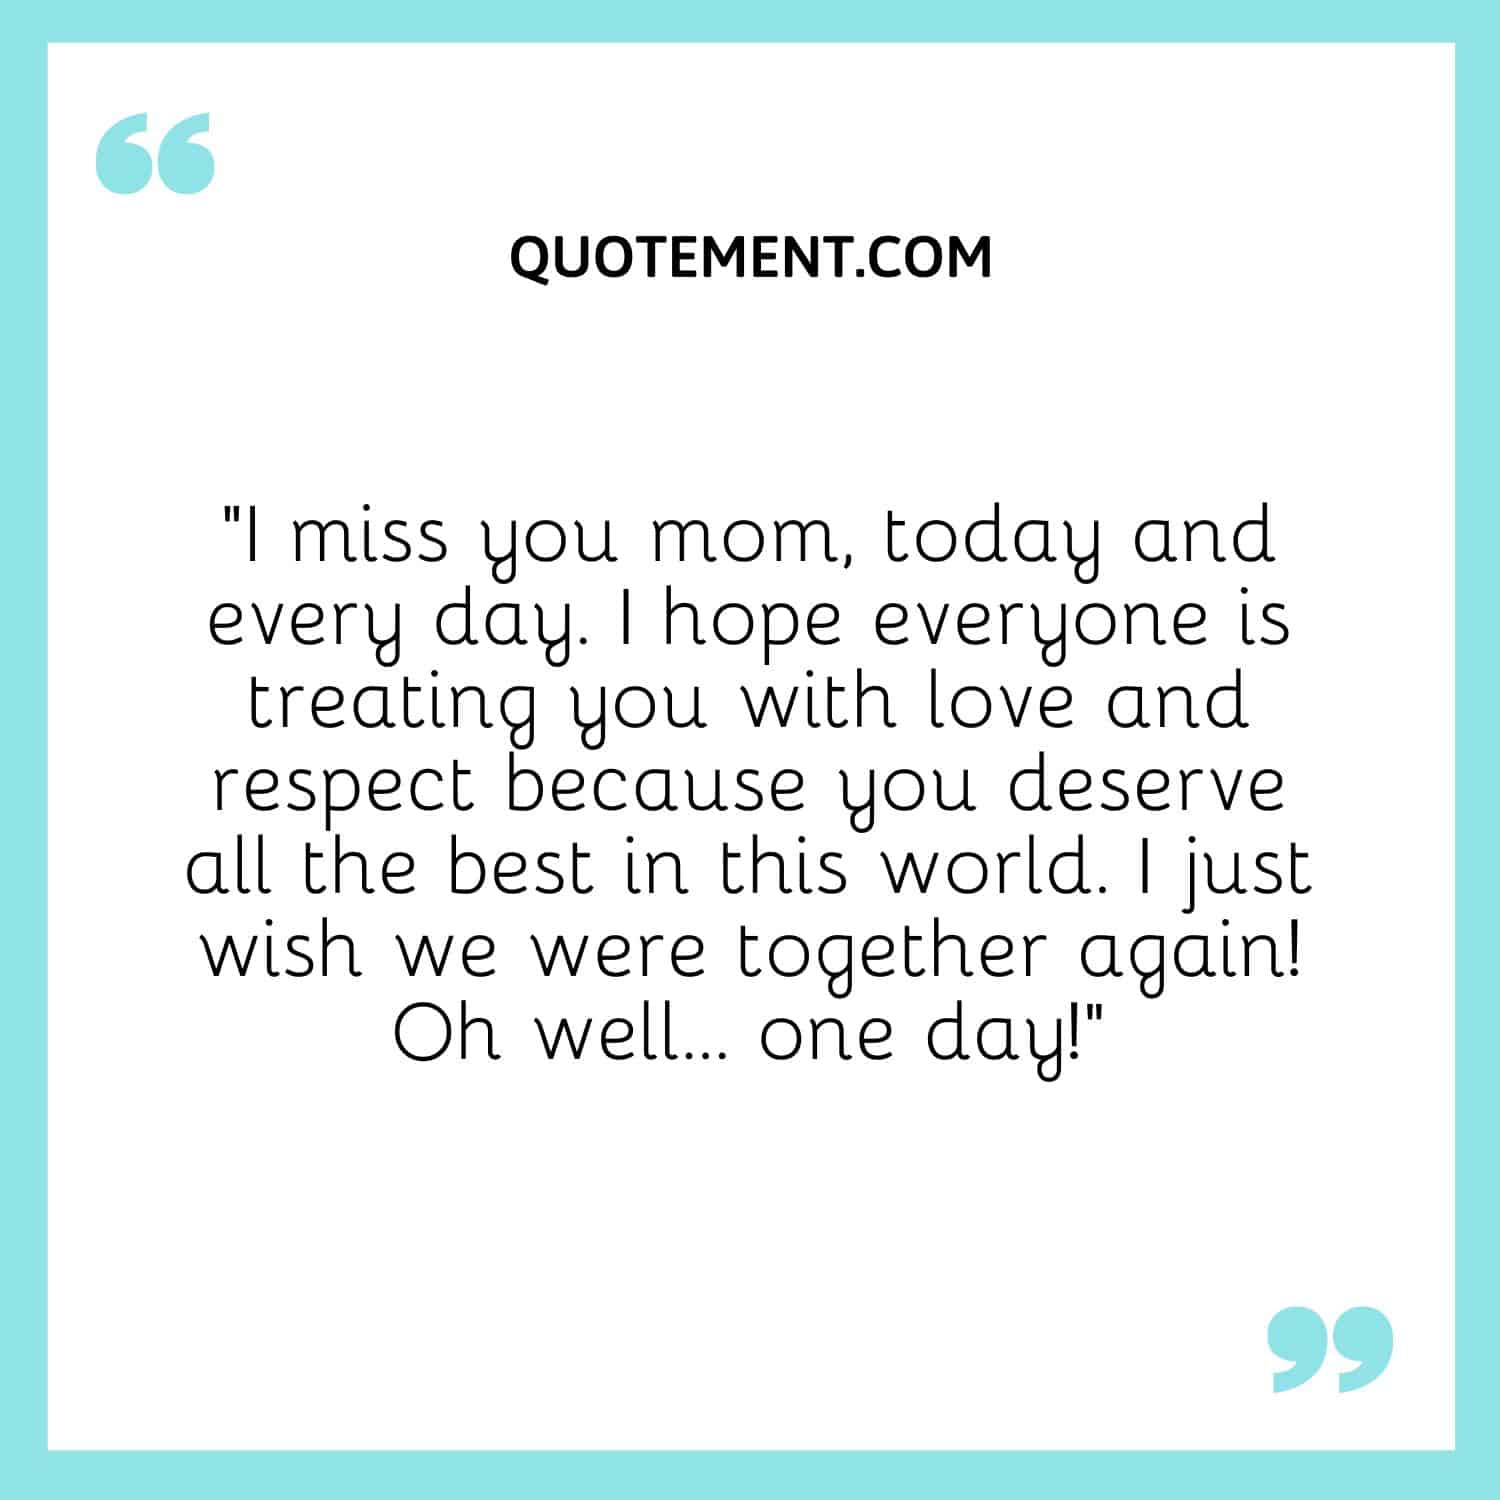 I miss you mom, today and every day